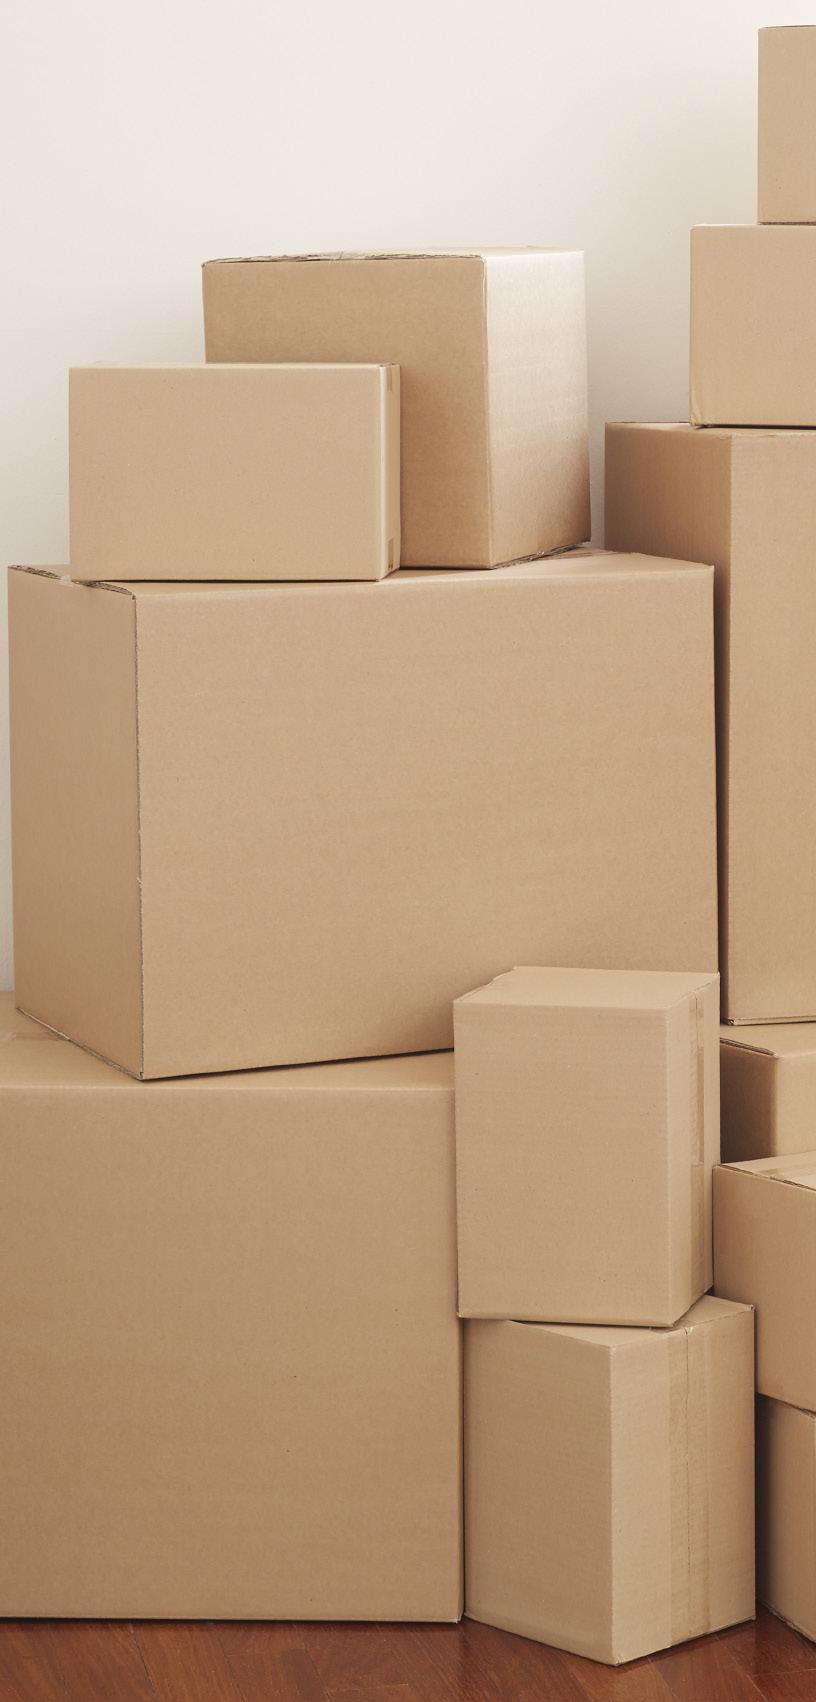 You can also do things like packing up your belongings where you currently live, or arranging for a moving company to come in and help you, or if it s going to be an investment property, this time